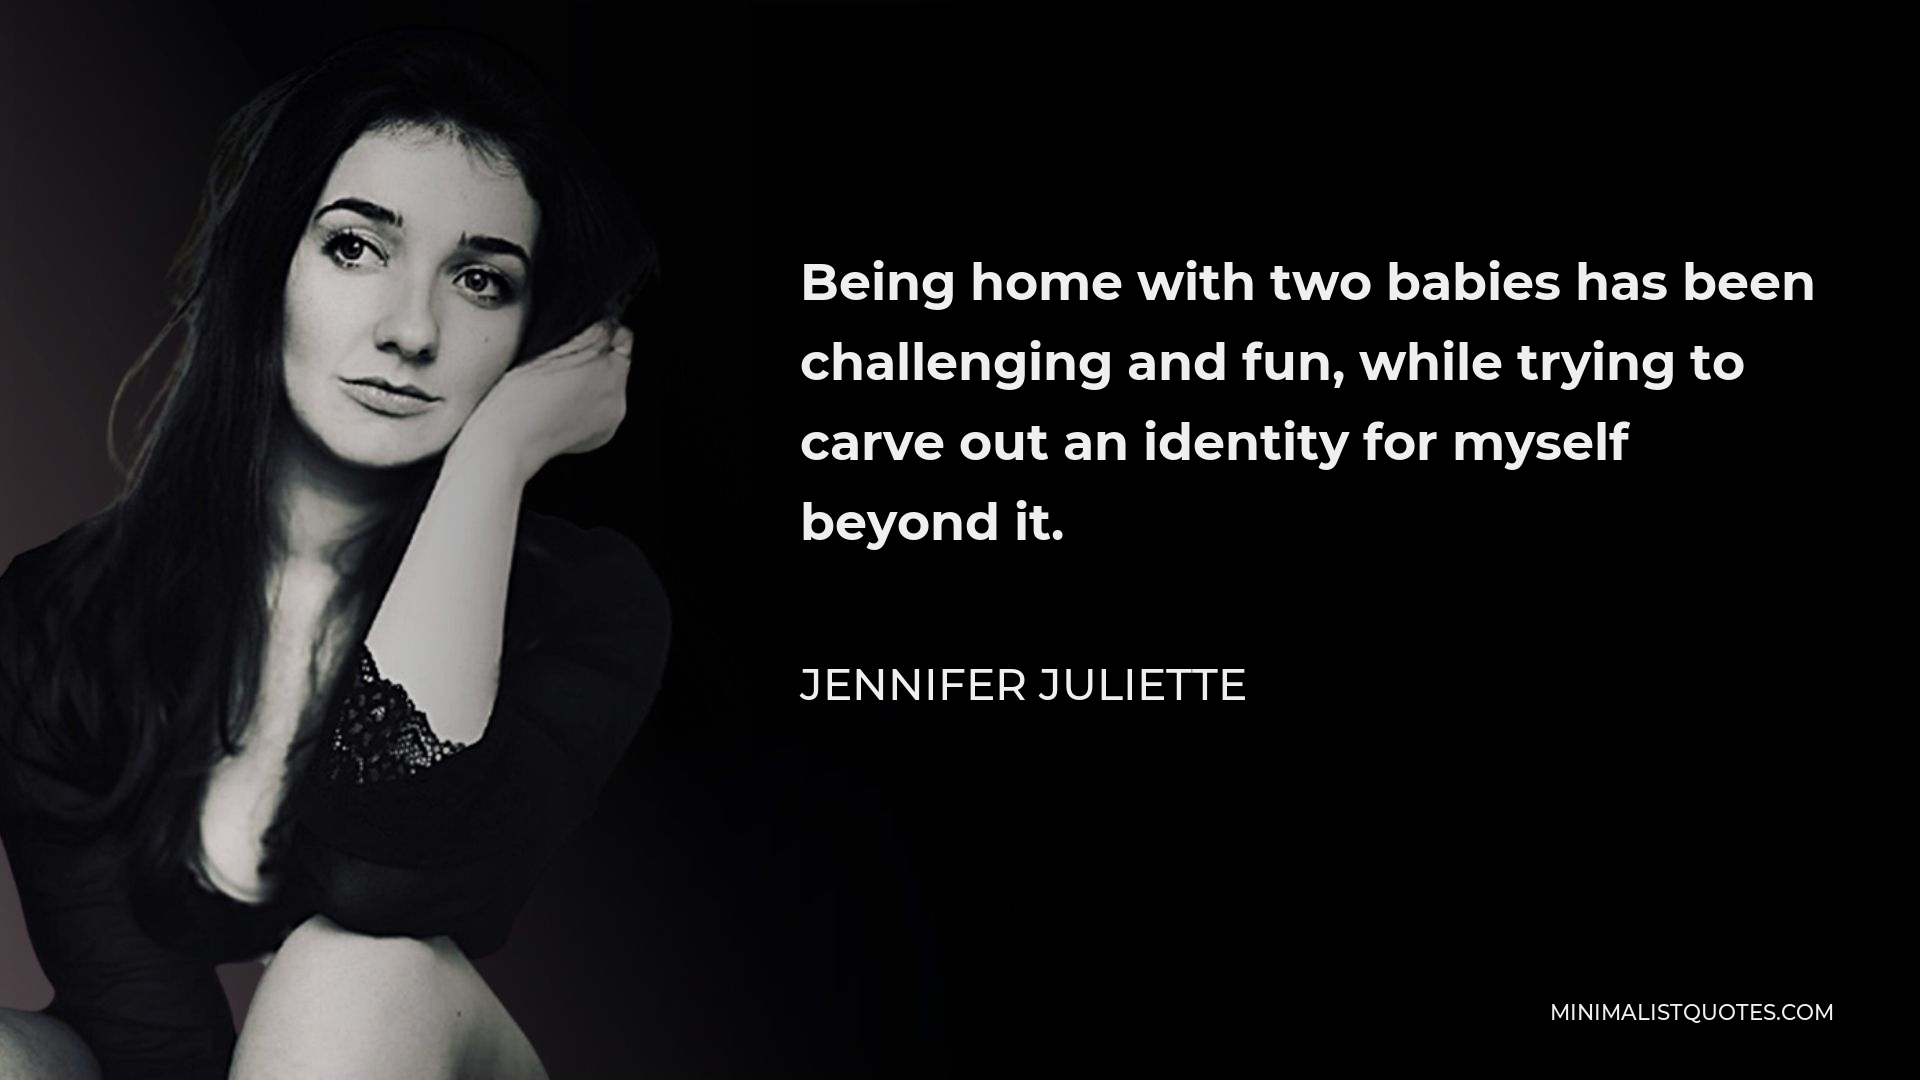 Jennifer Juliette Quote - Being home with two babies has been challenging and fun, while trying to carve out an identity for myself beyond it.